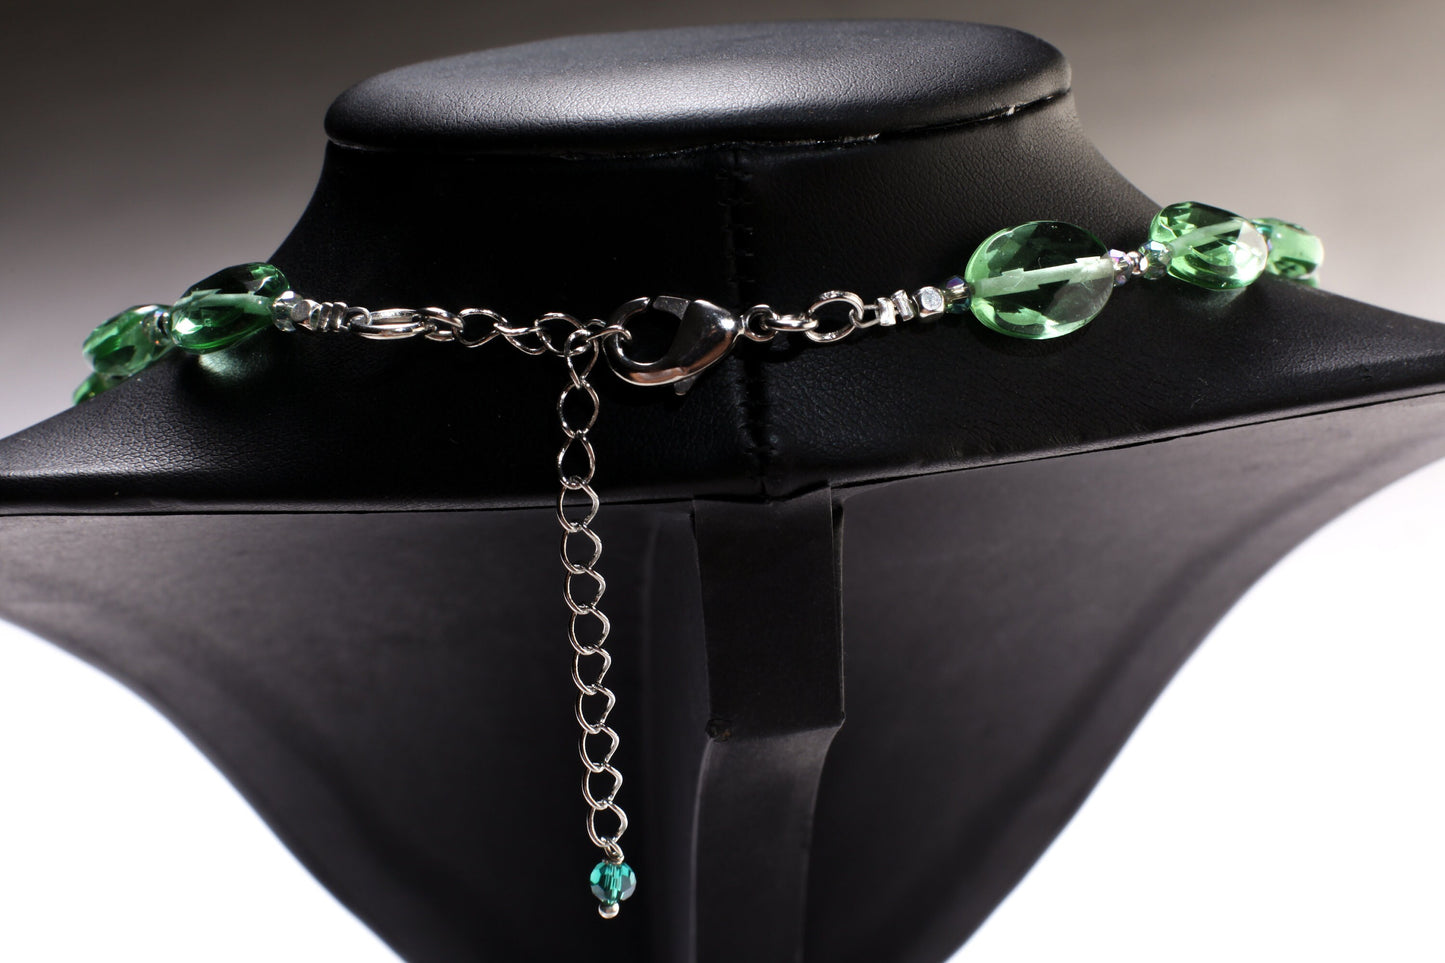 Green Quartz Faceted Oval, Matching Crystal Accent Beads 20.5" Necklace with 3" Extension Chain